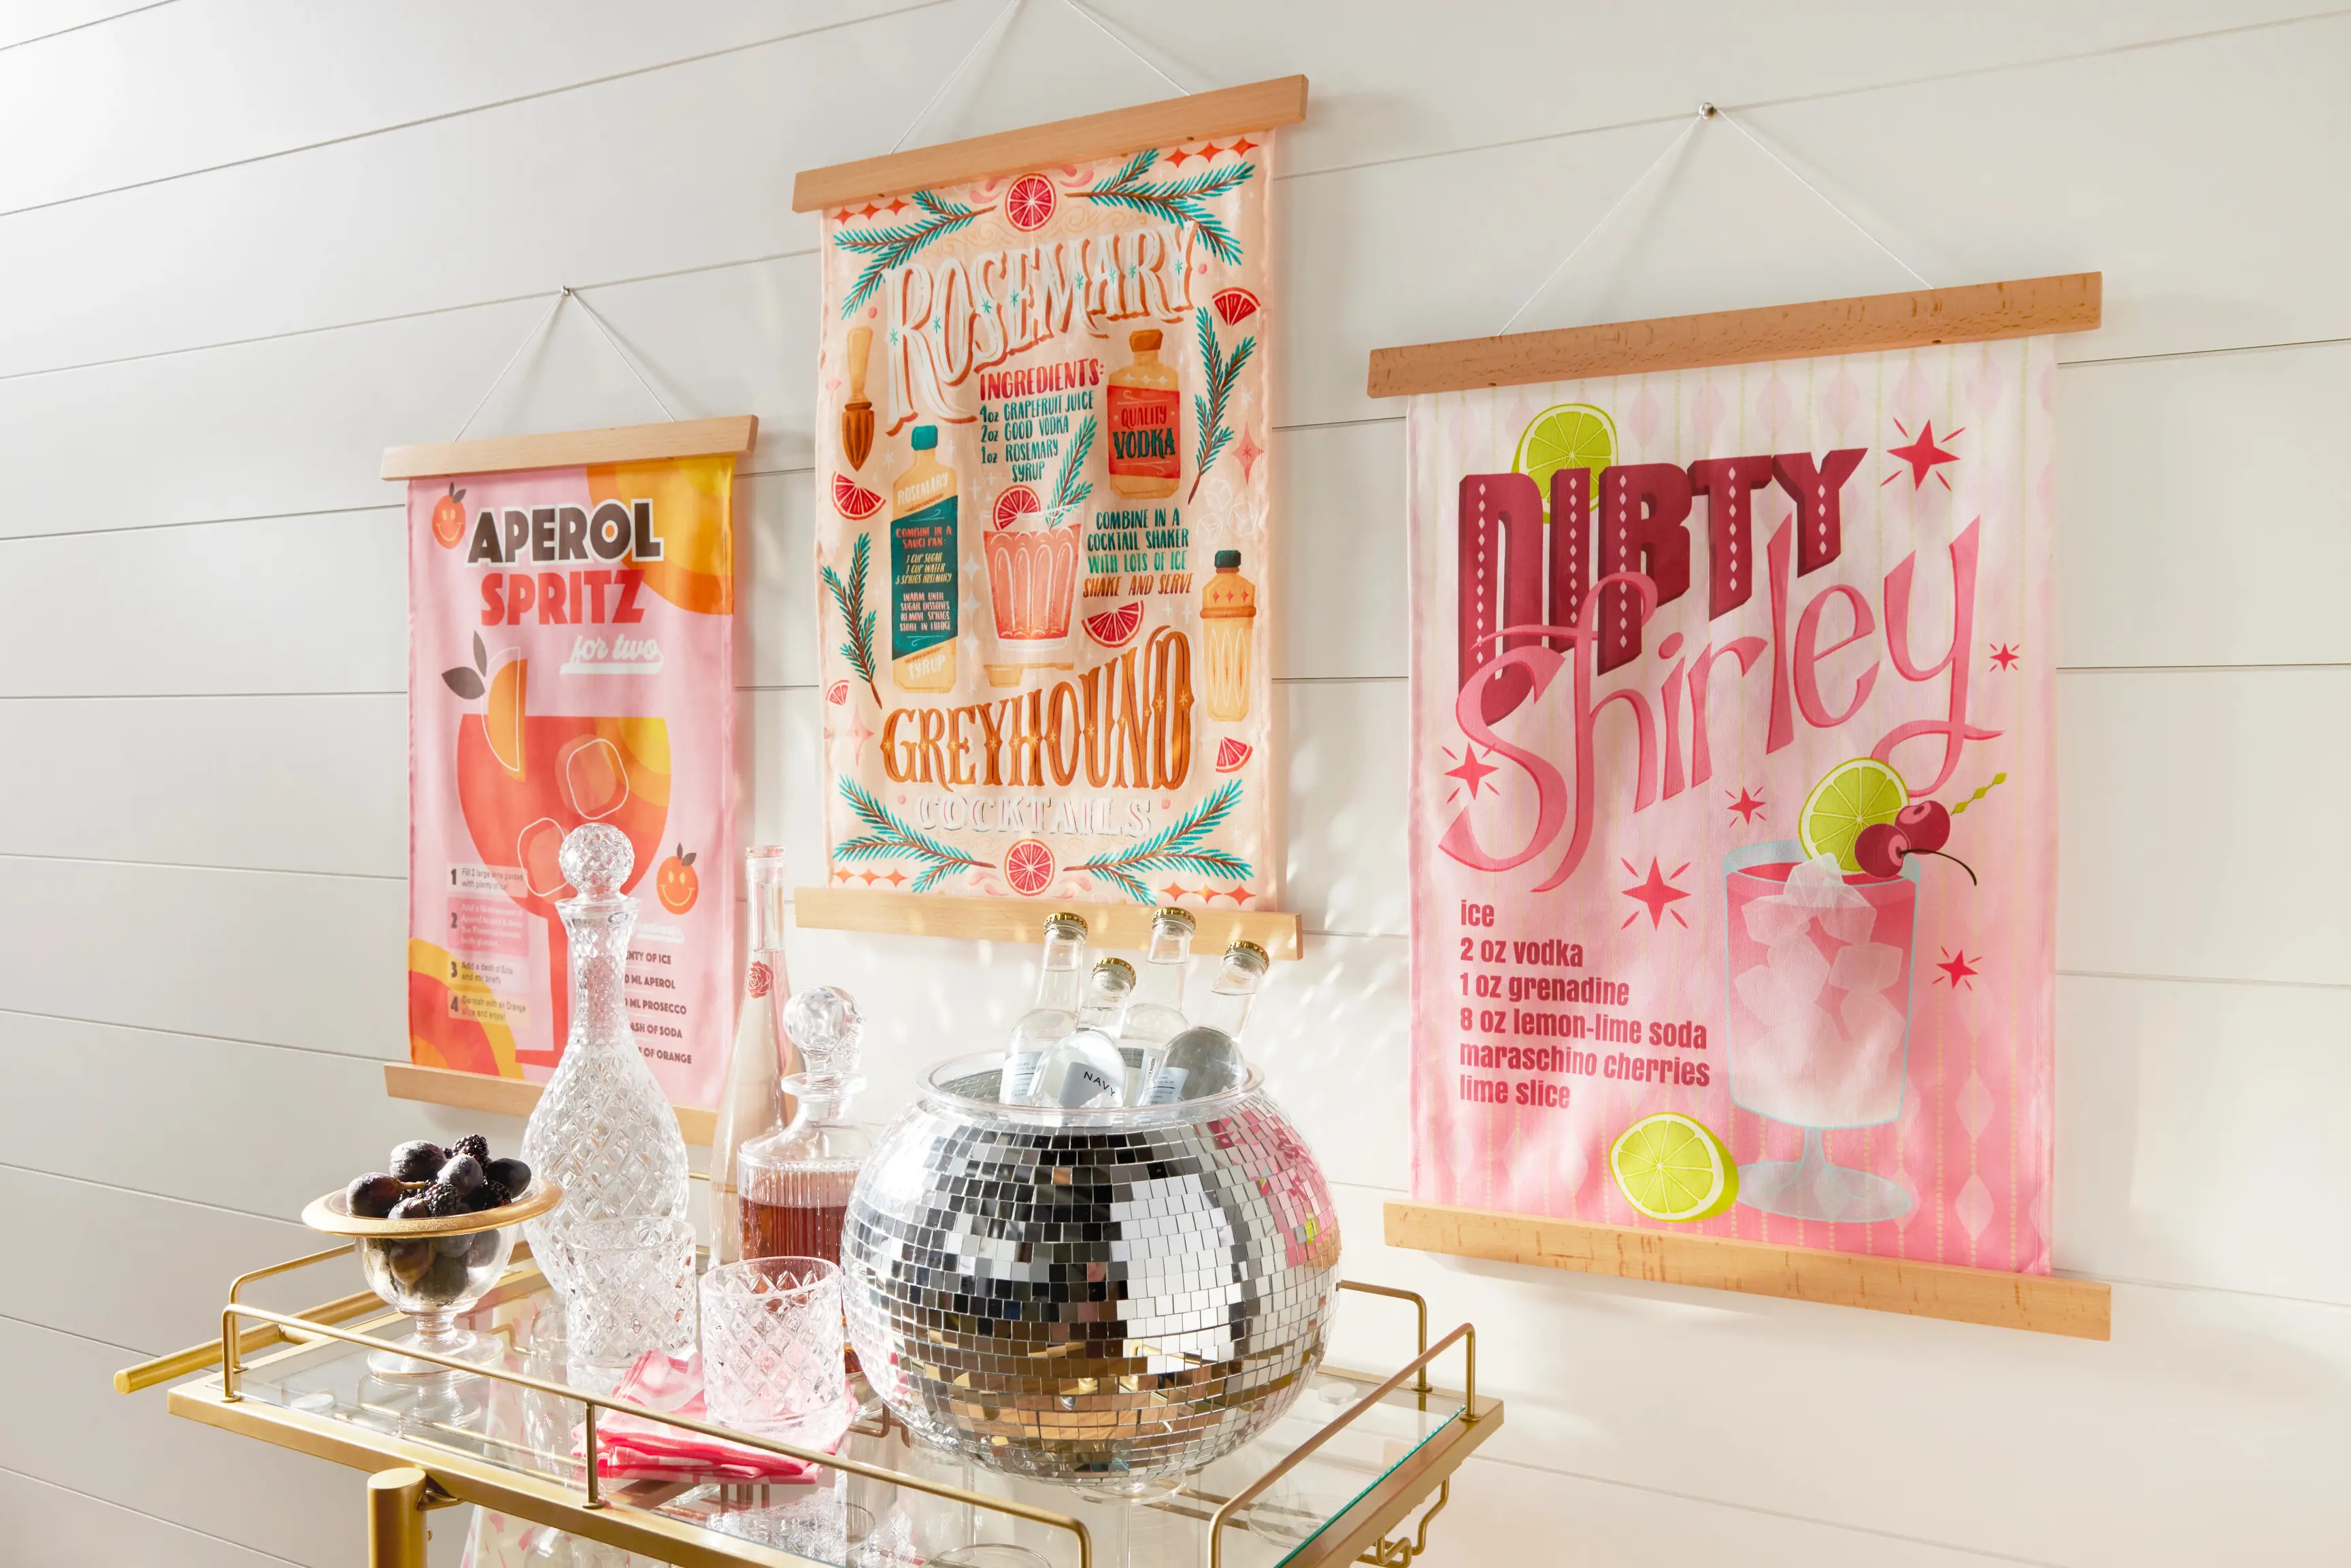 Wall hanging's with drink recipes over a bar cart